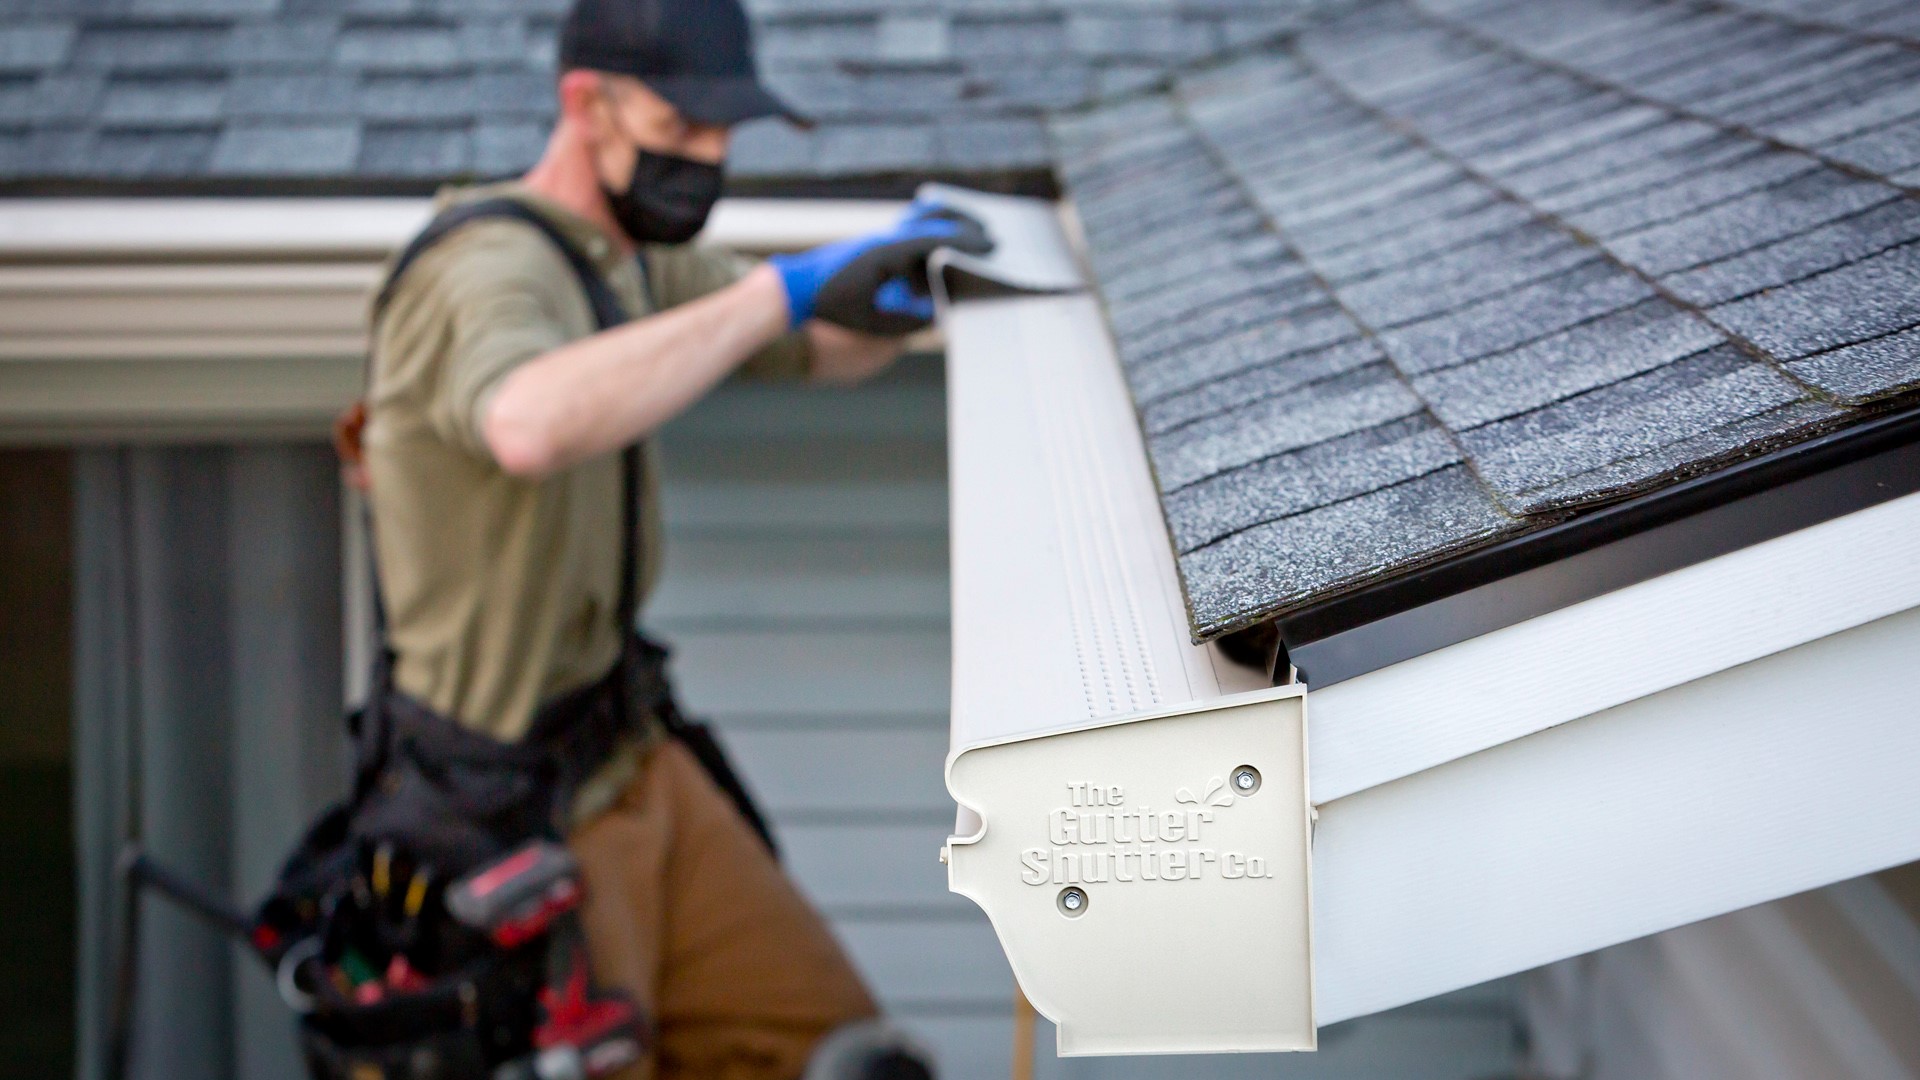 Don't let gutter problems get you down this season. Sponsored by Pacific Gutter Company